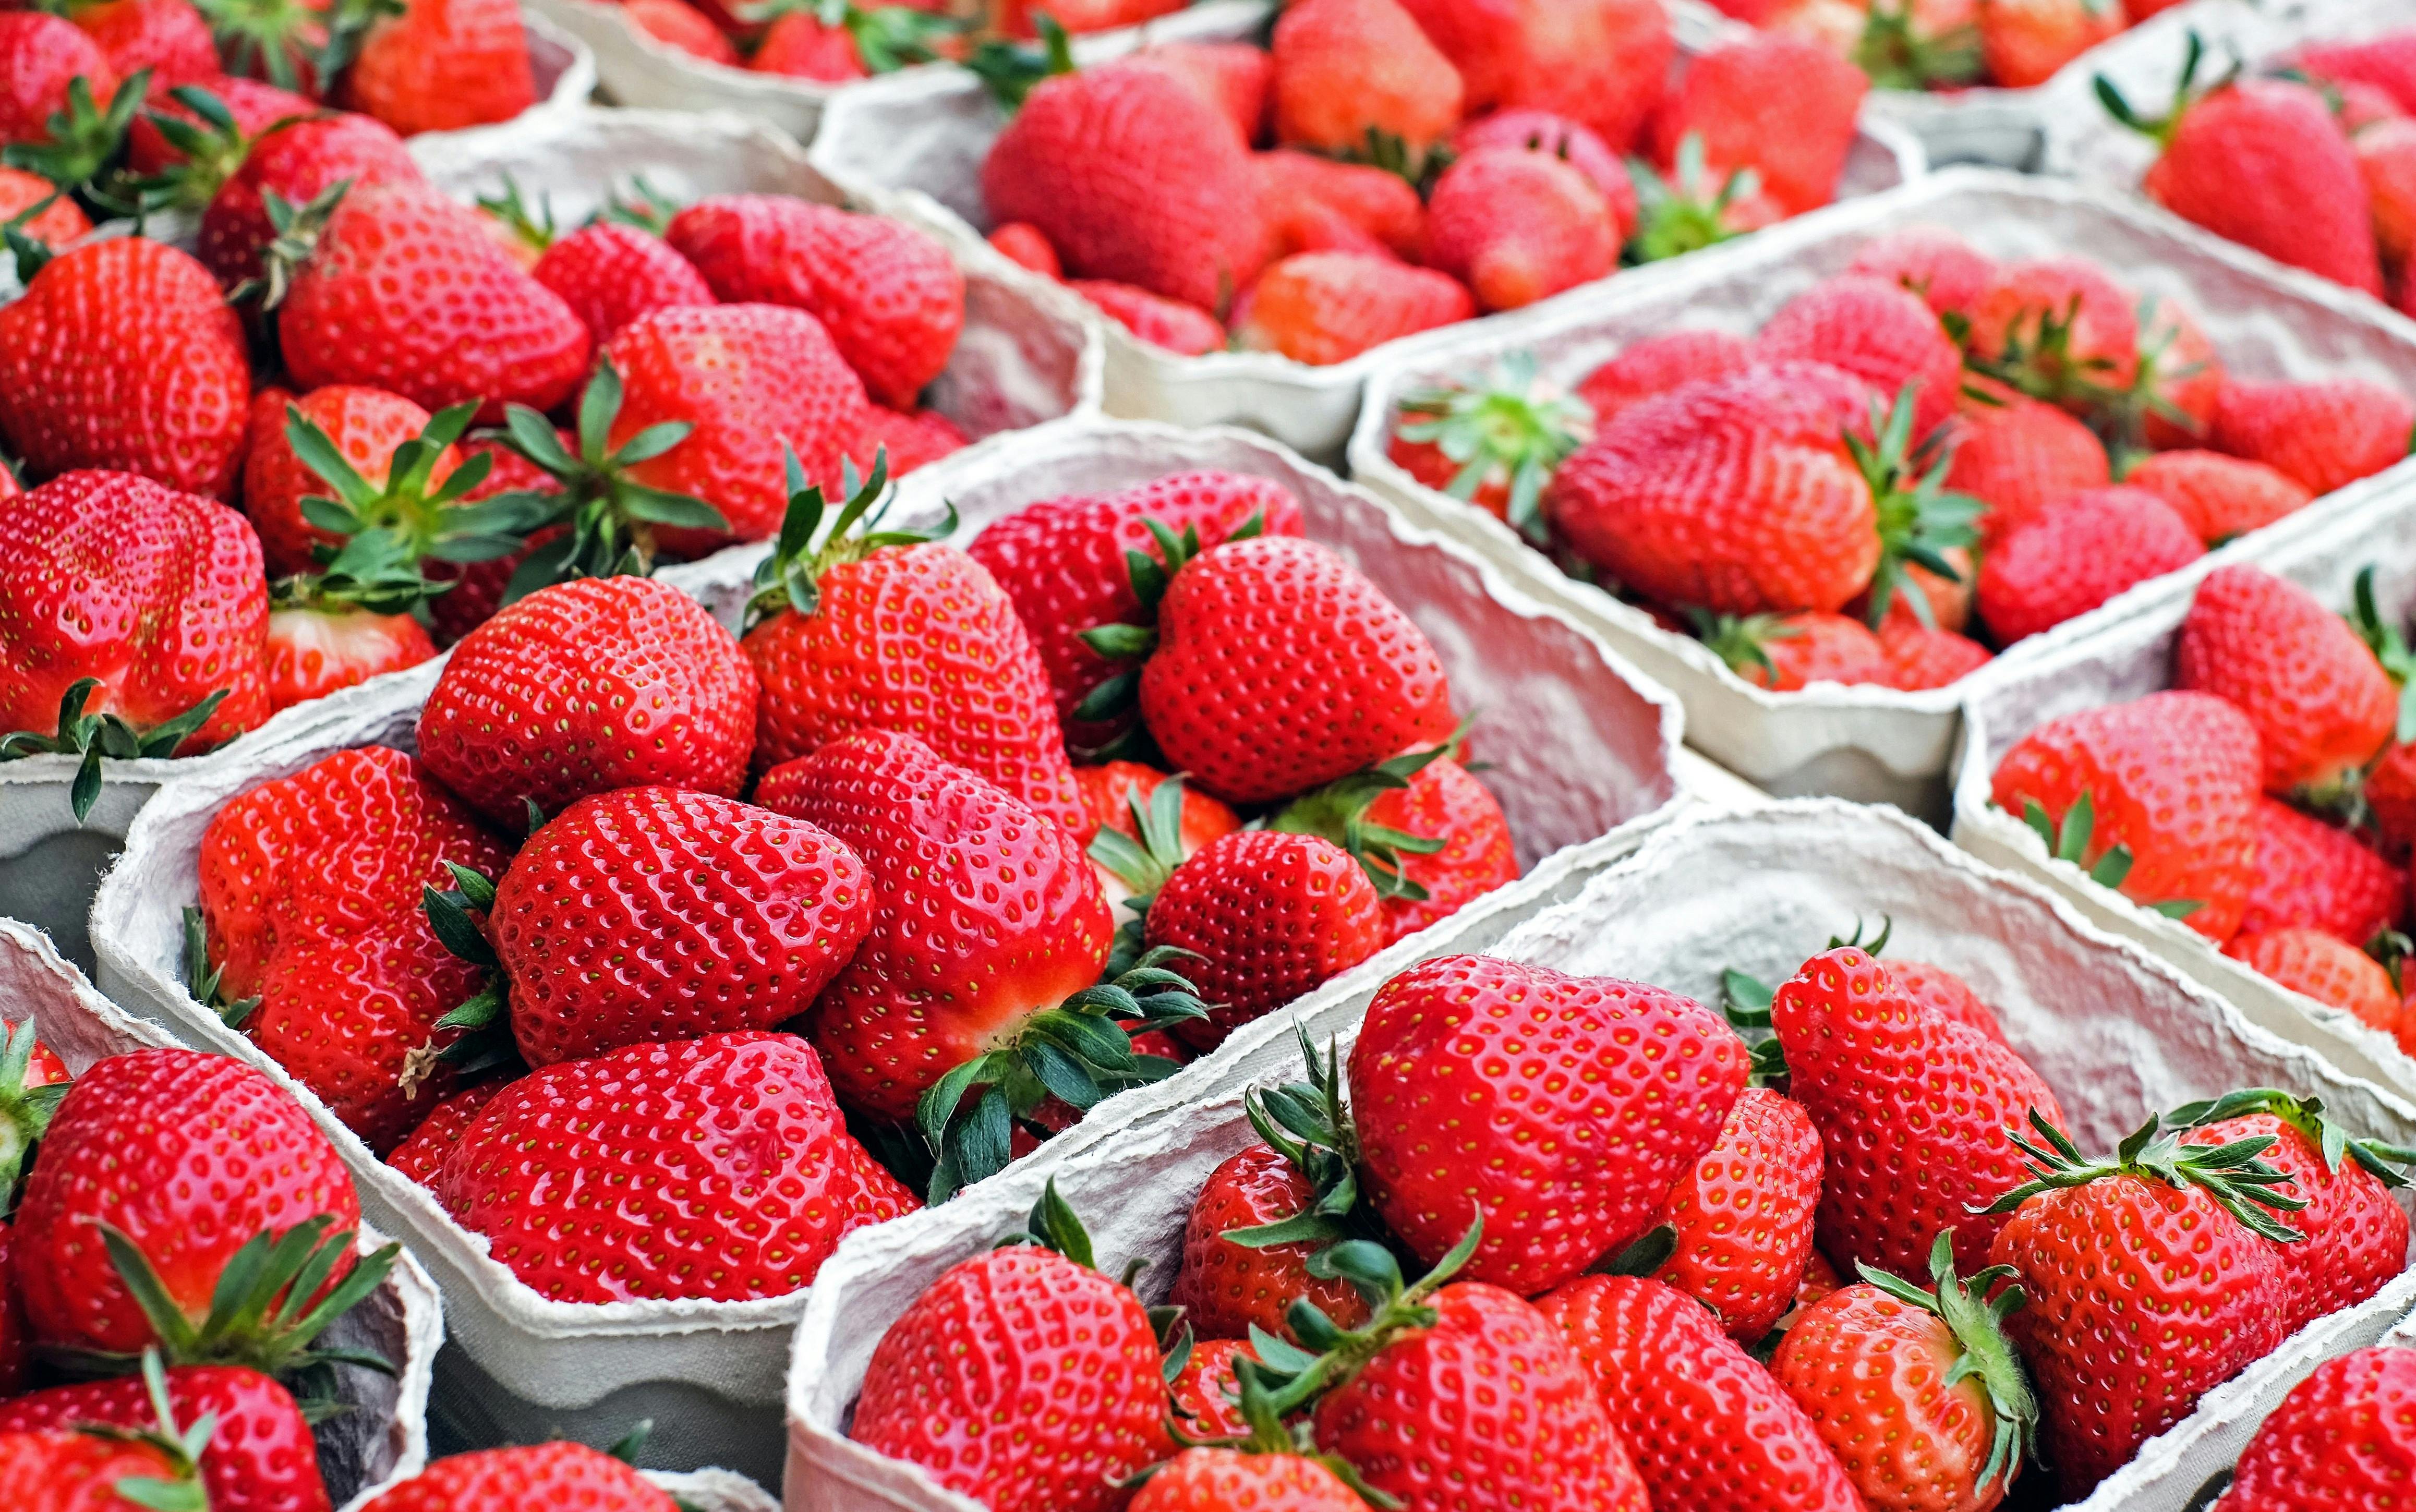 Boxes of strawberries | Source: Pexels